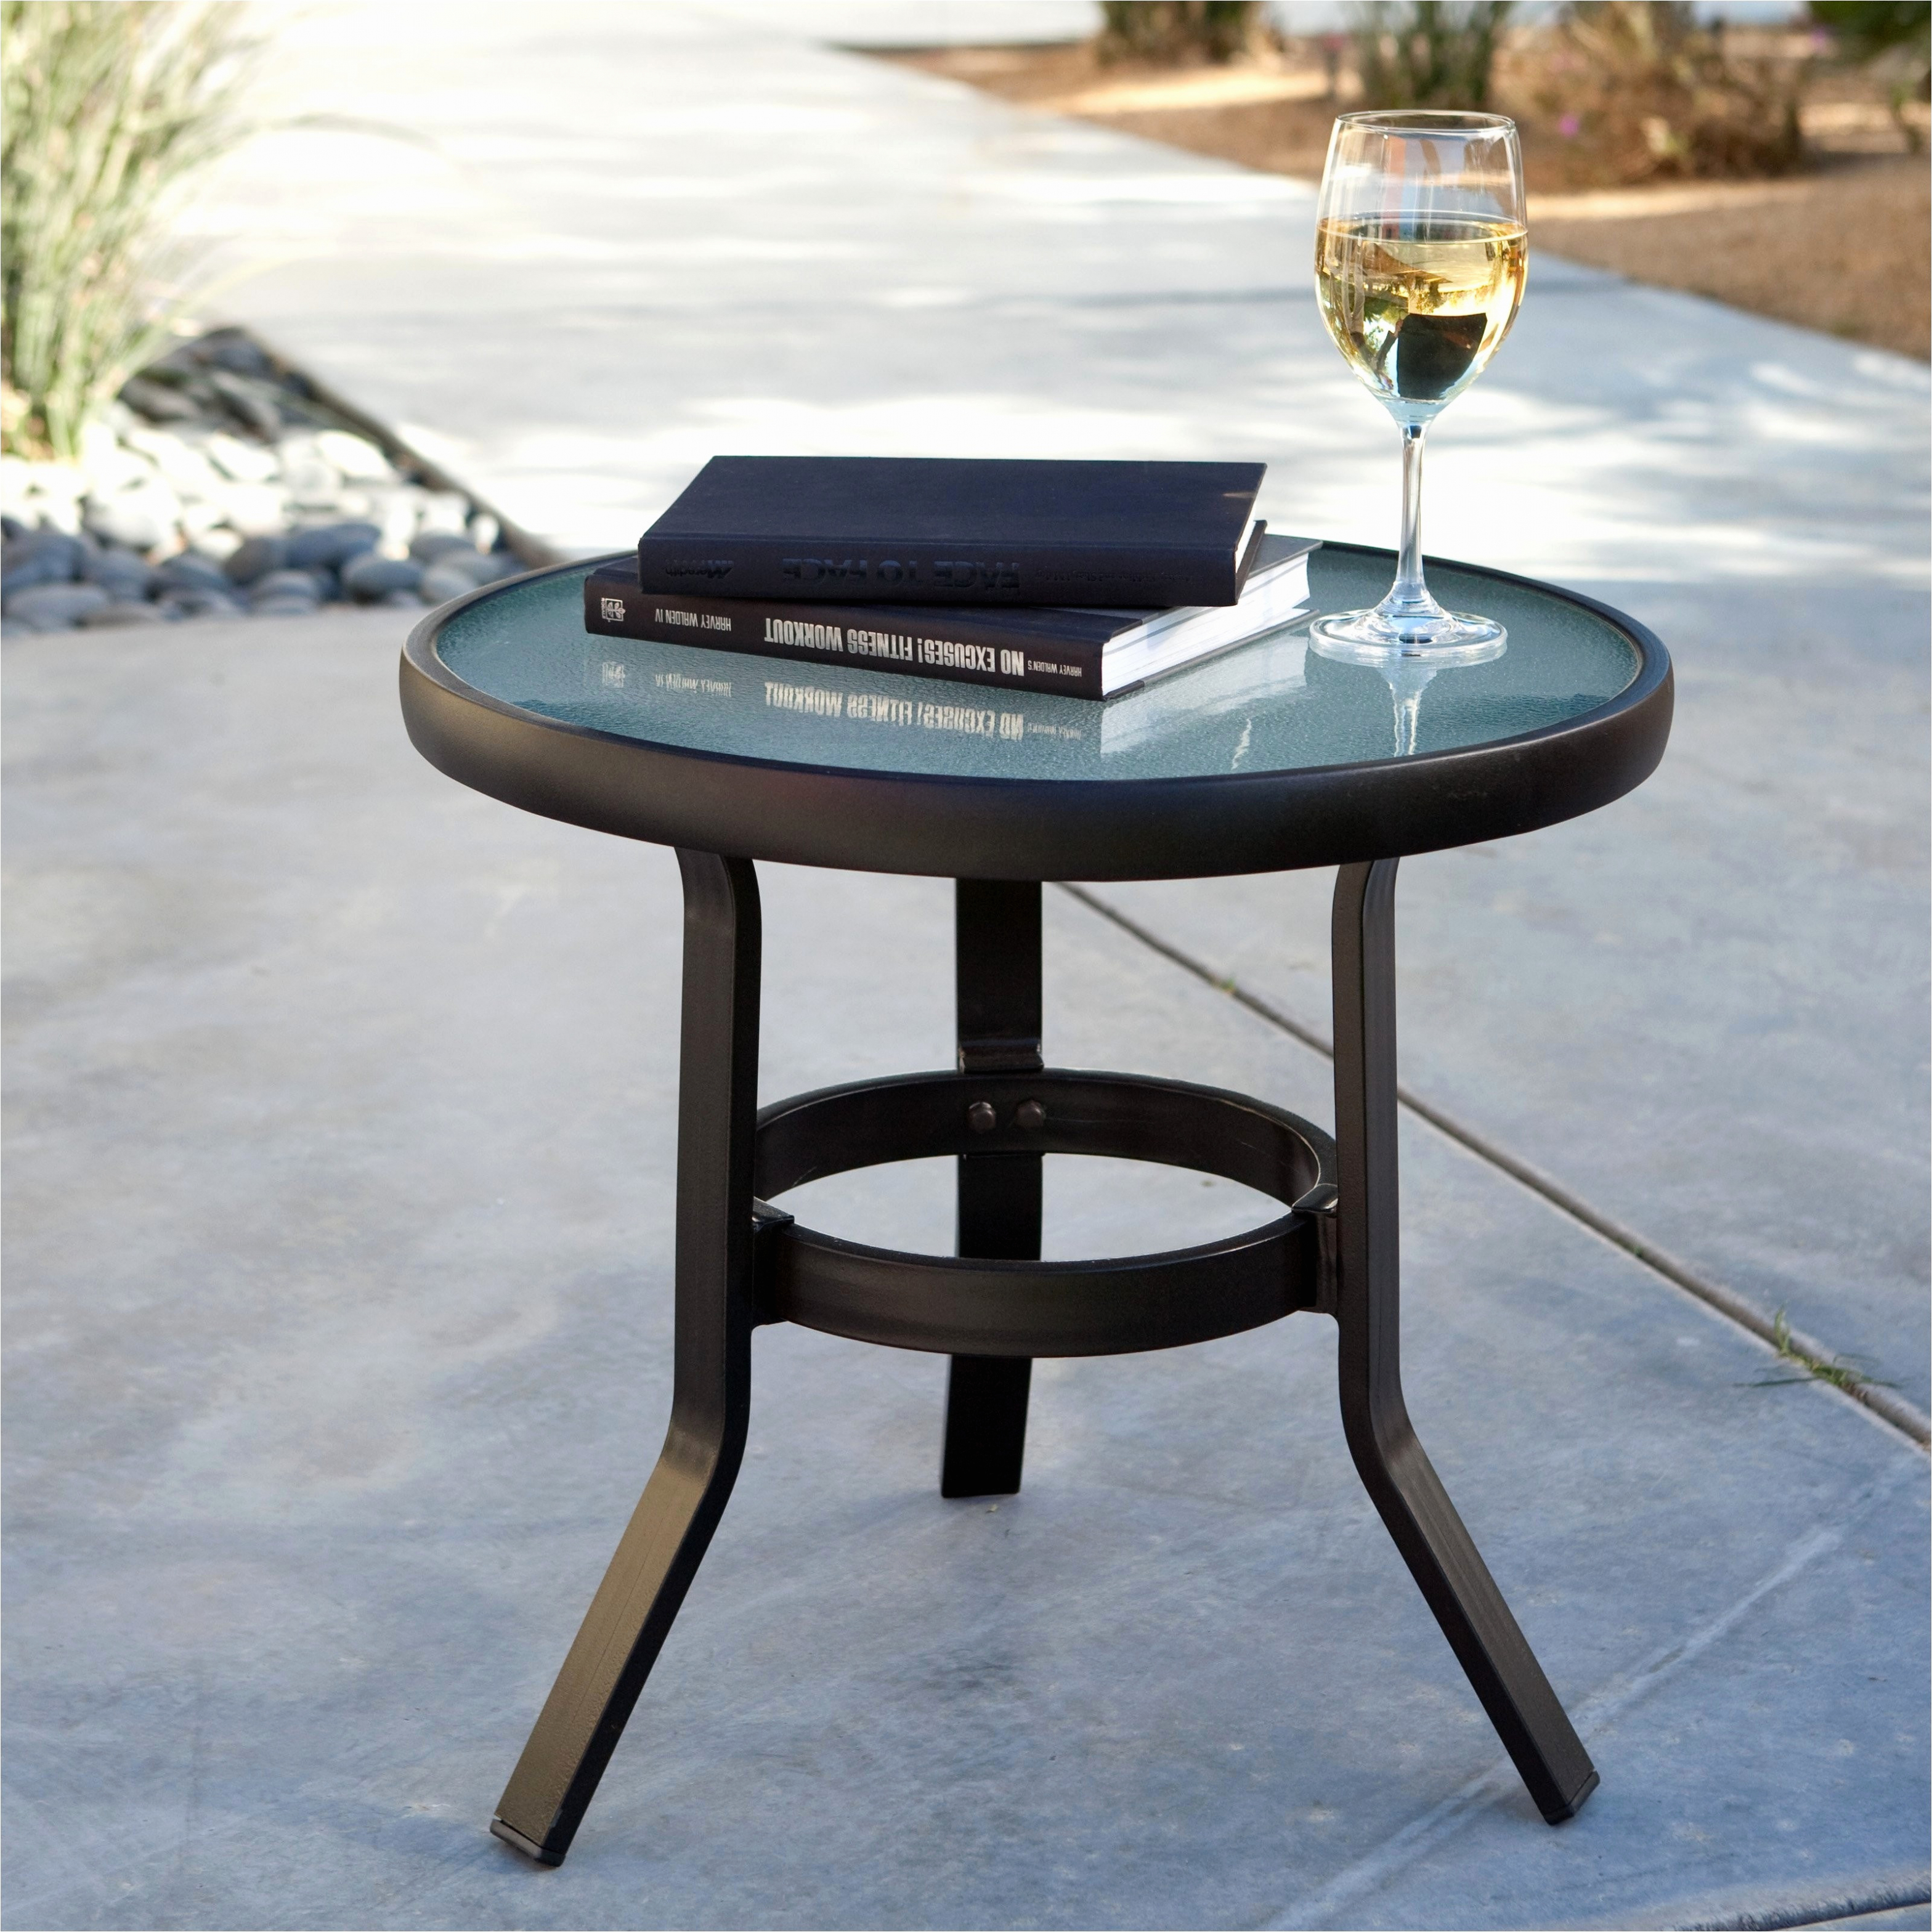 outdoor small metal garden side table awesome wicker patio with regard redoubtable your residence inspiration reviews red accent dining umbrella hole round silver coffee tray